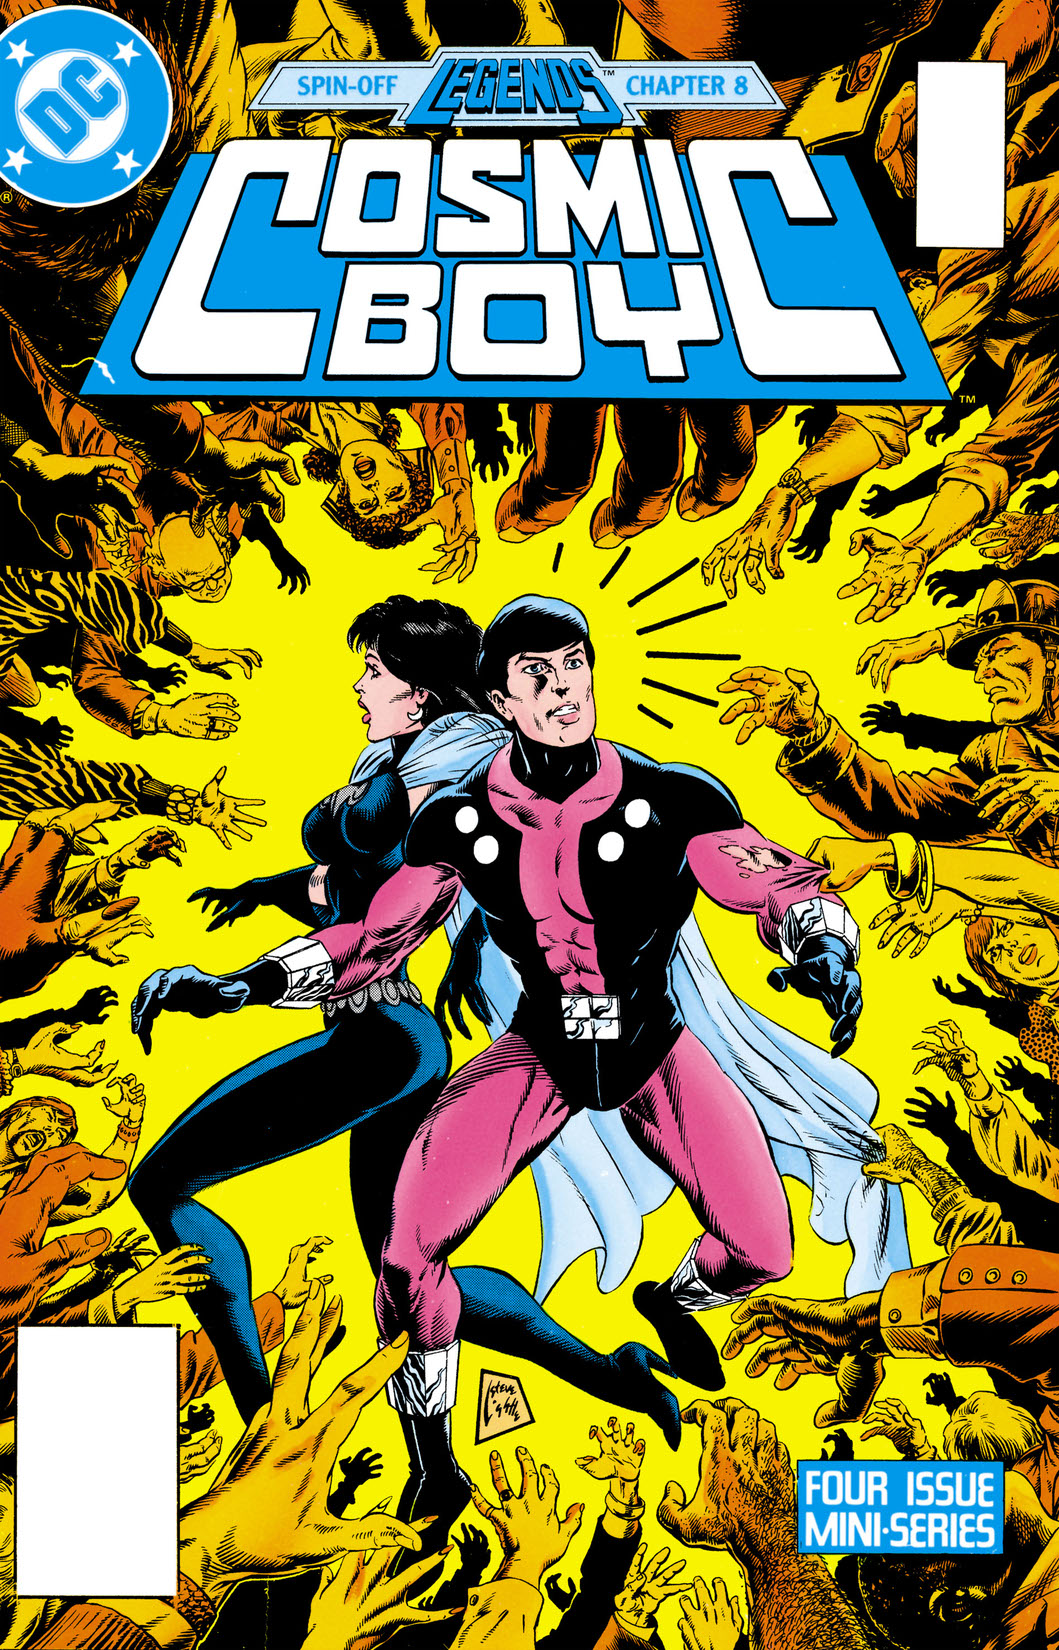 Cosmic Boy #2 preview images